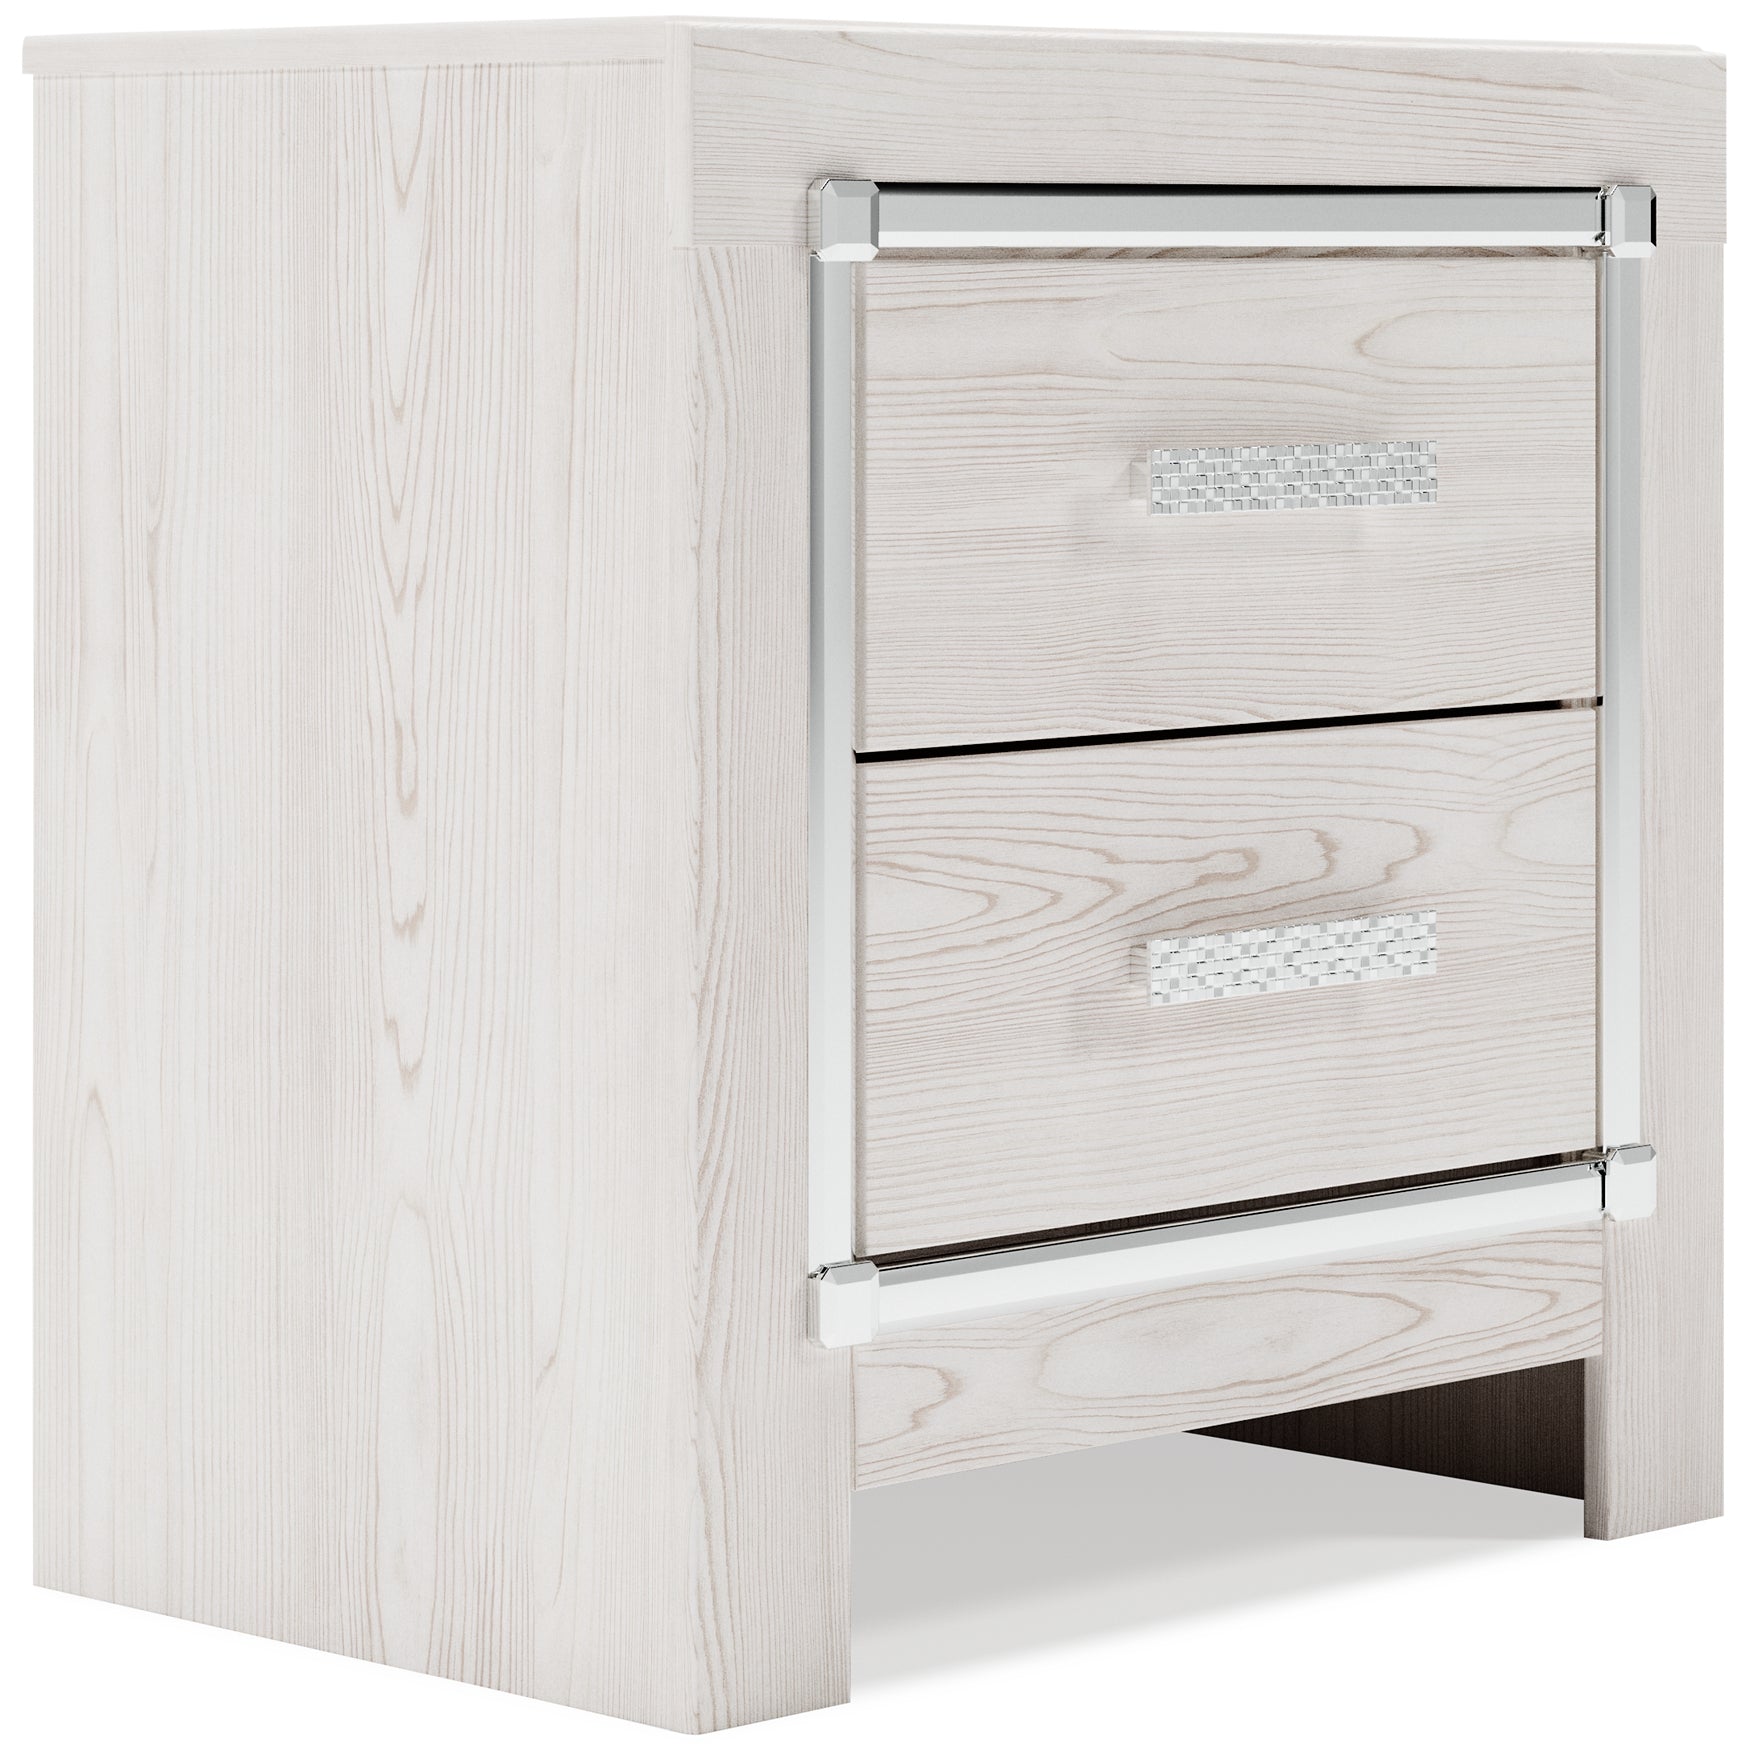 Altyra King Bookcase Headboard with Mirrored Dresser, Chest and Nightstand Smyrna Furniture Outlet